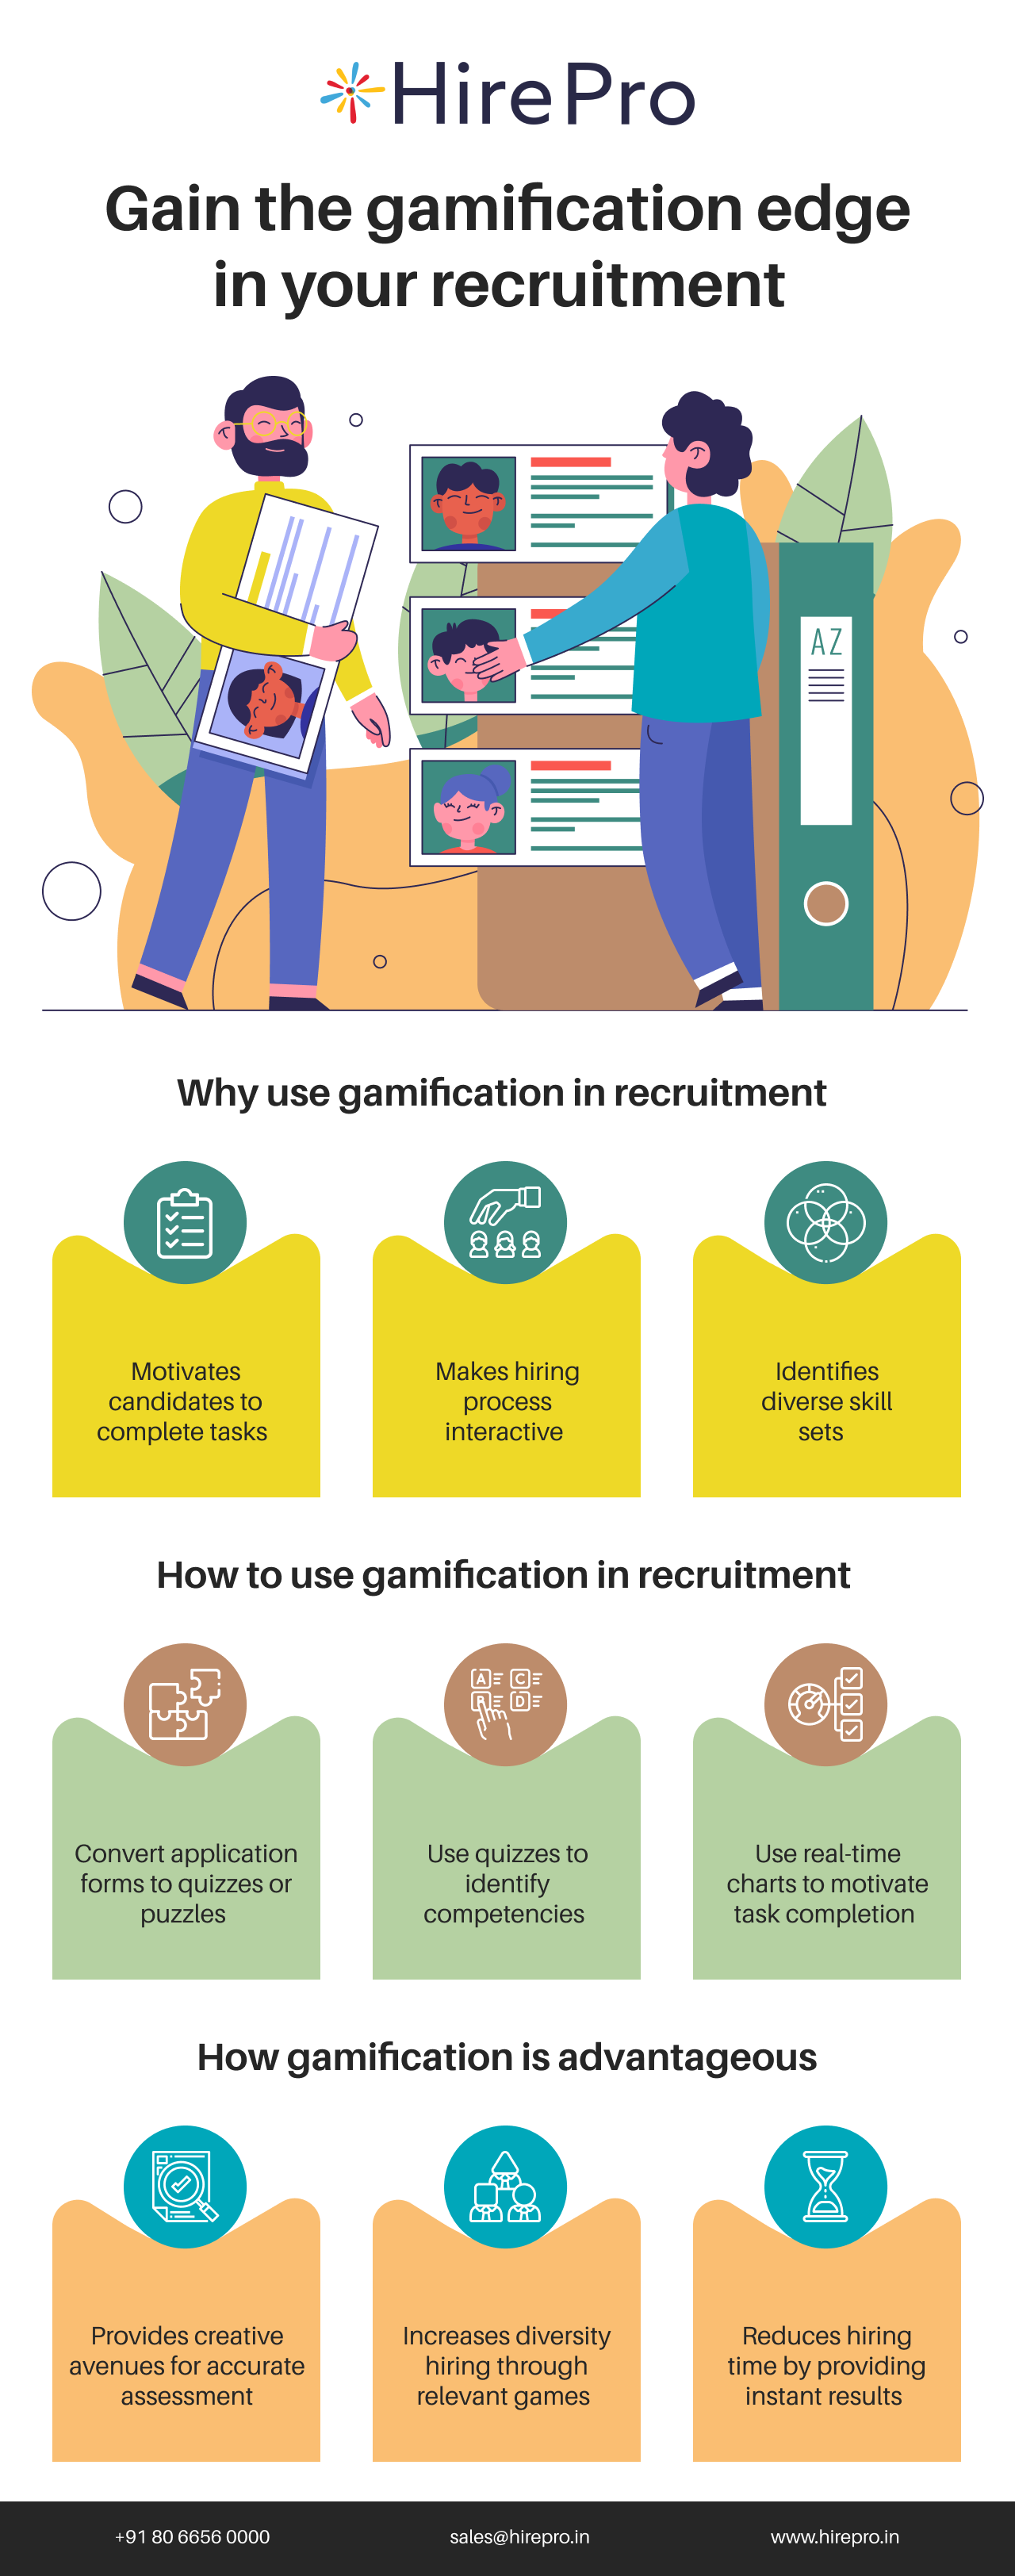 Gain the gamification edge in your recruitment